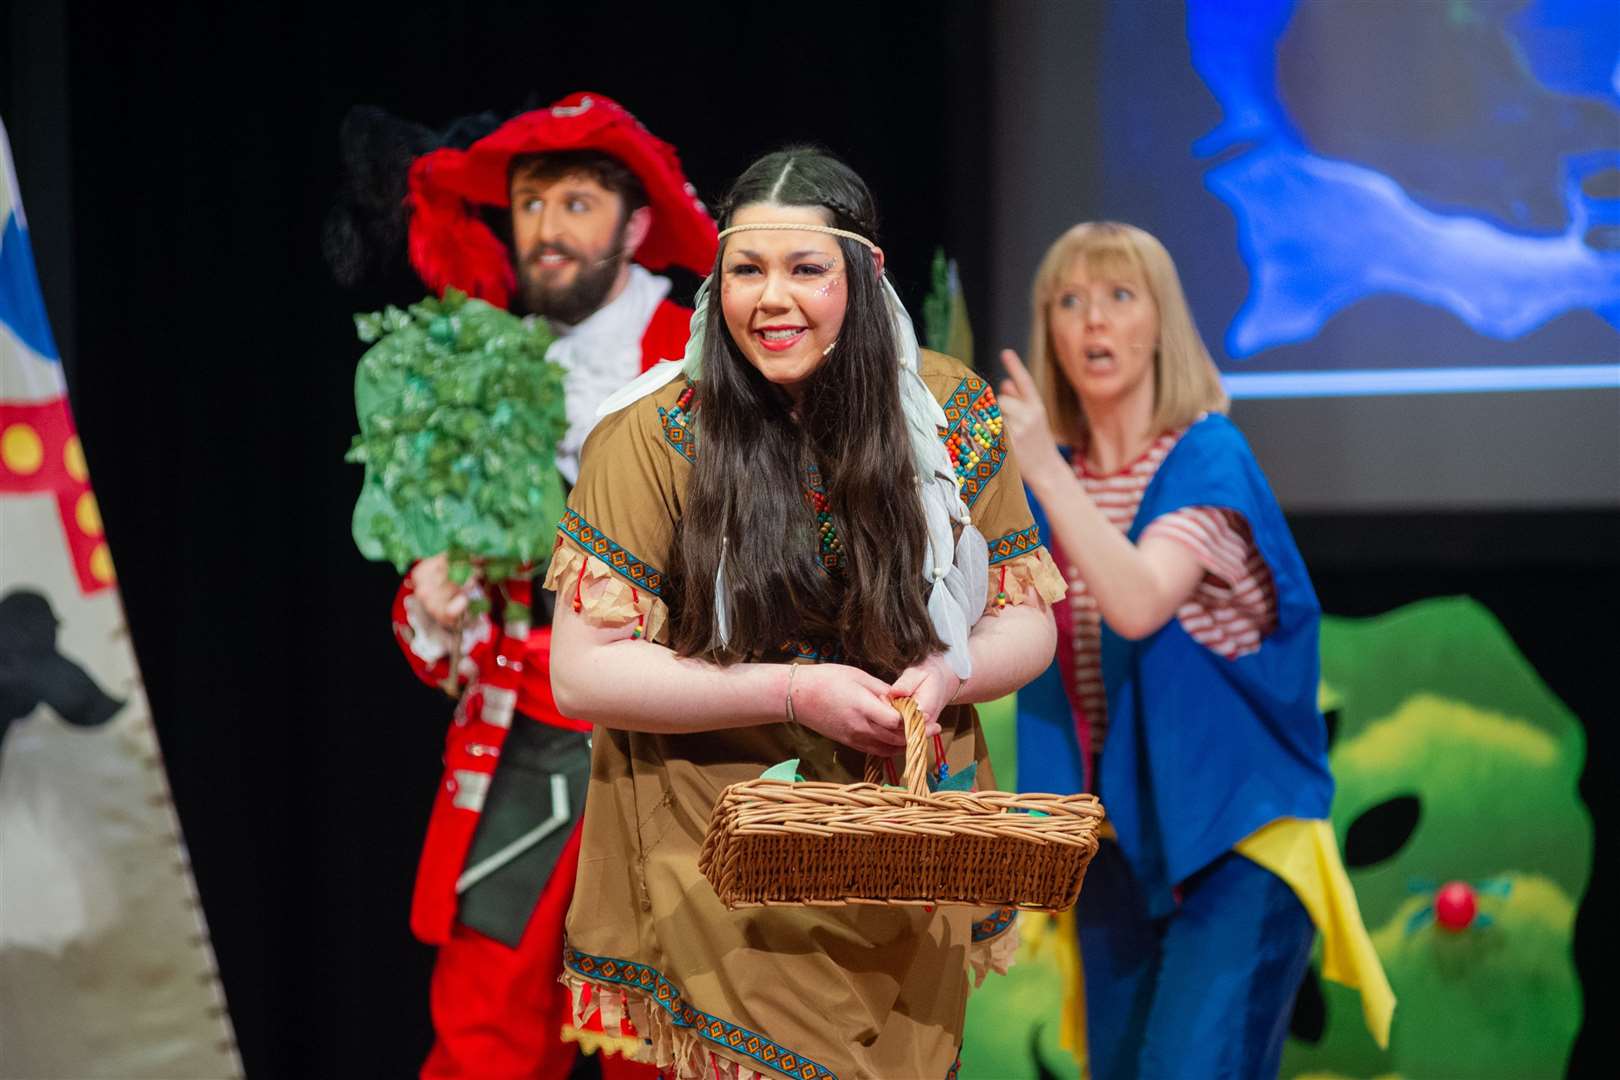 From left; Captain Hook (Andrew Sutherland), Tiger Lily (Ally Deas), Smee (Naomi Bunyan).Picture: Daniel Forsyth